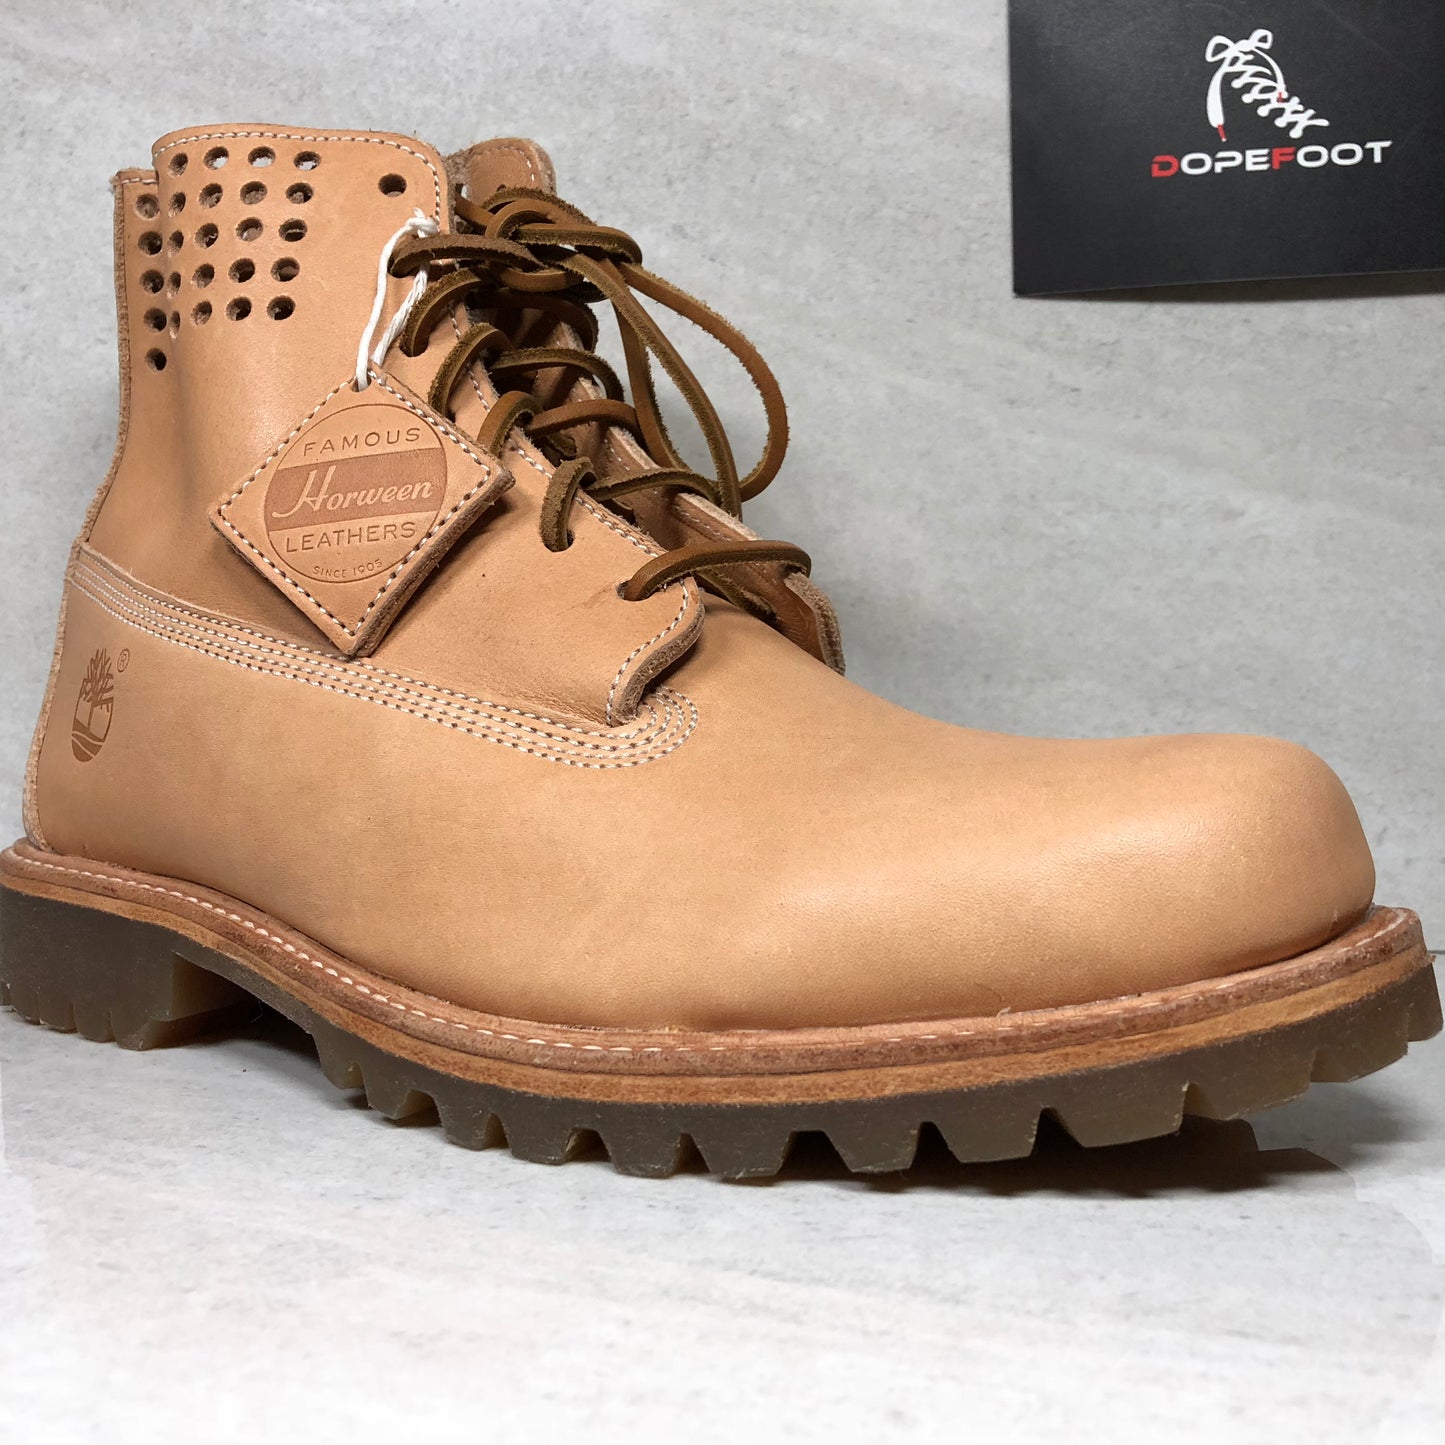 DS Timberland 6" Premium Perforated Veg Tan Taille 10.5 Cuir Horween TB0A1BBJ